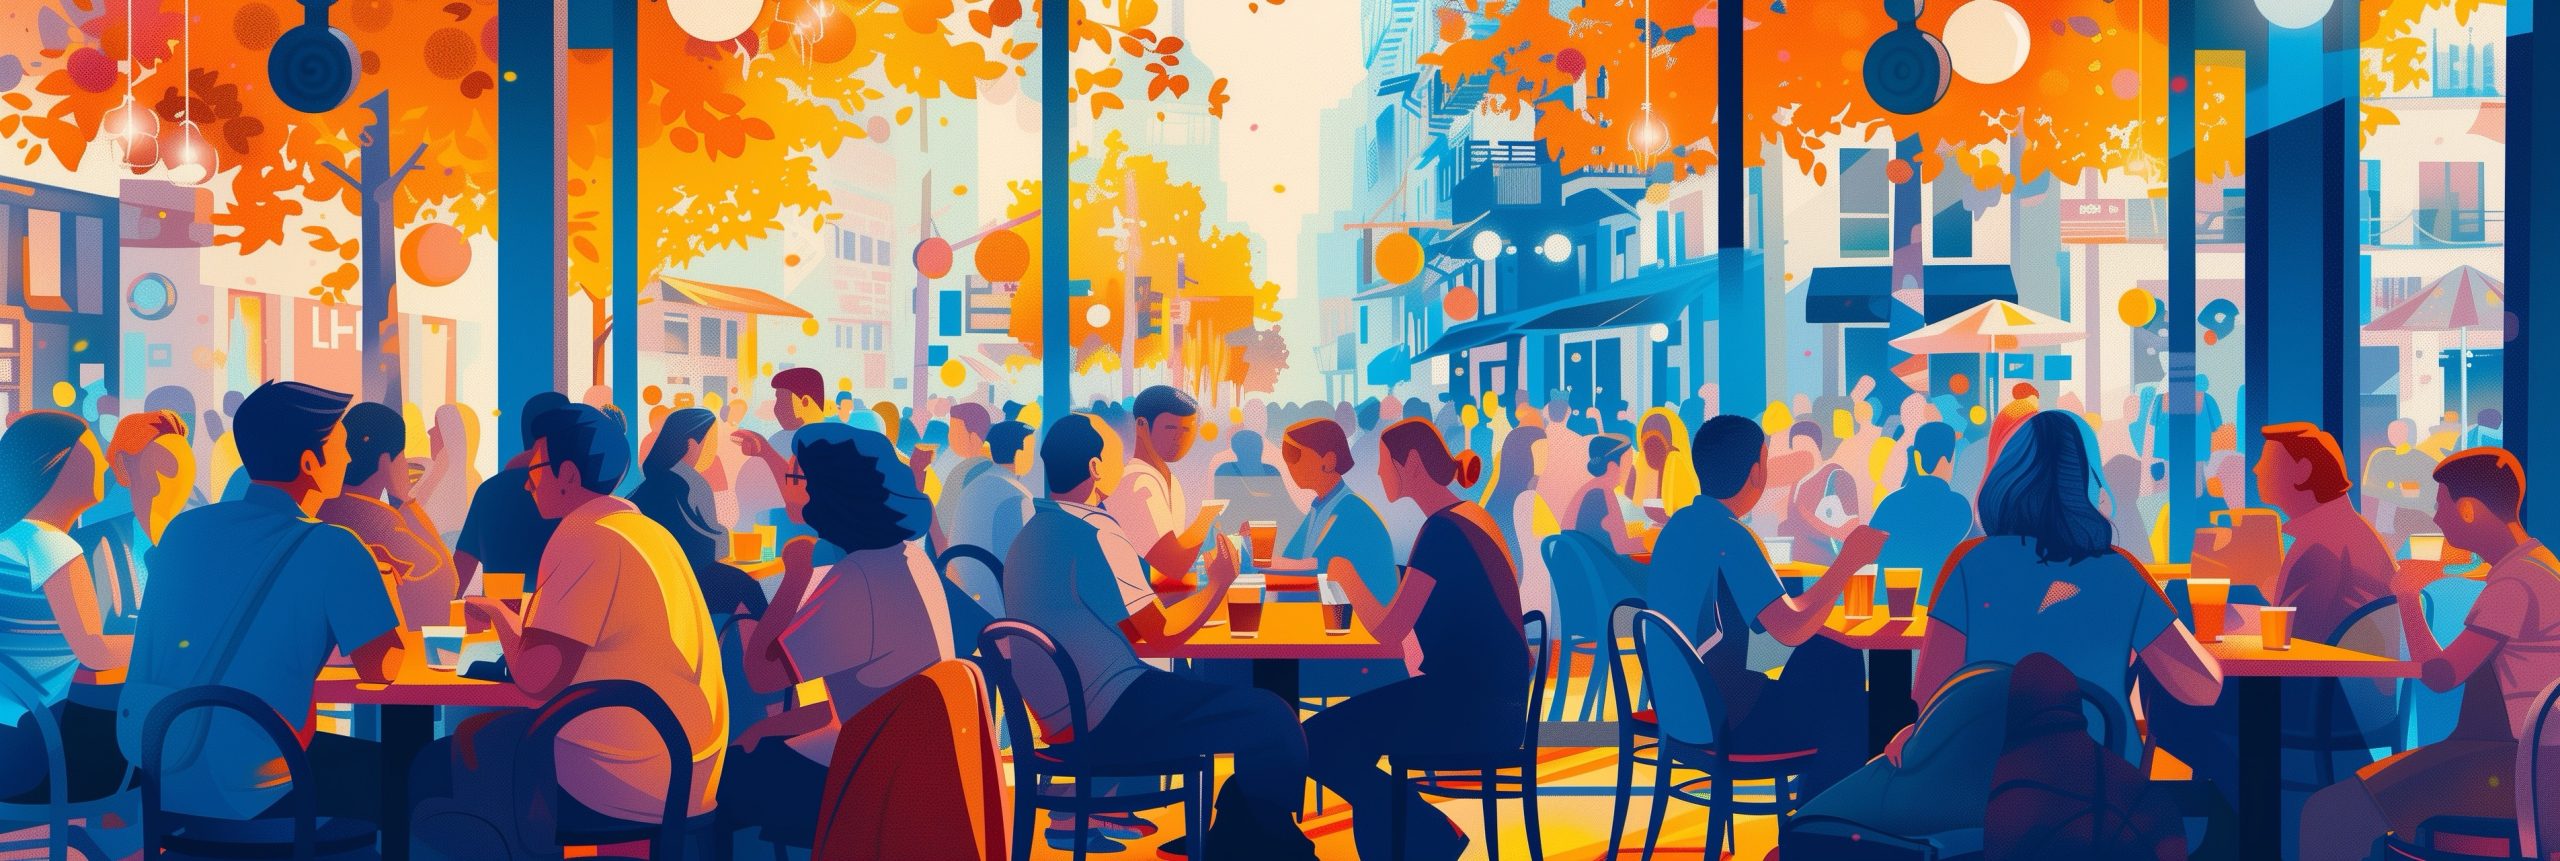 Graphic image showing a variety of people sitting in an outdoor dining area. There are trees and buildings in the background, suggesting the cafe is in a town or city.